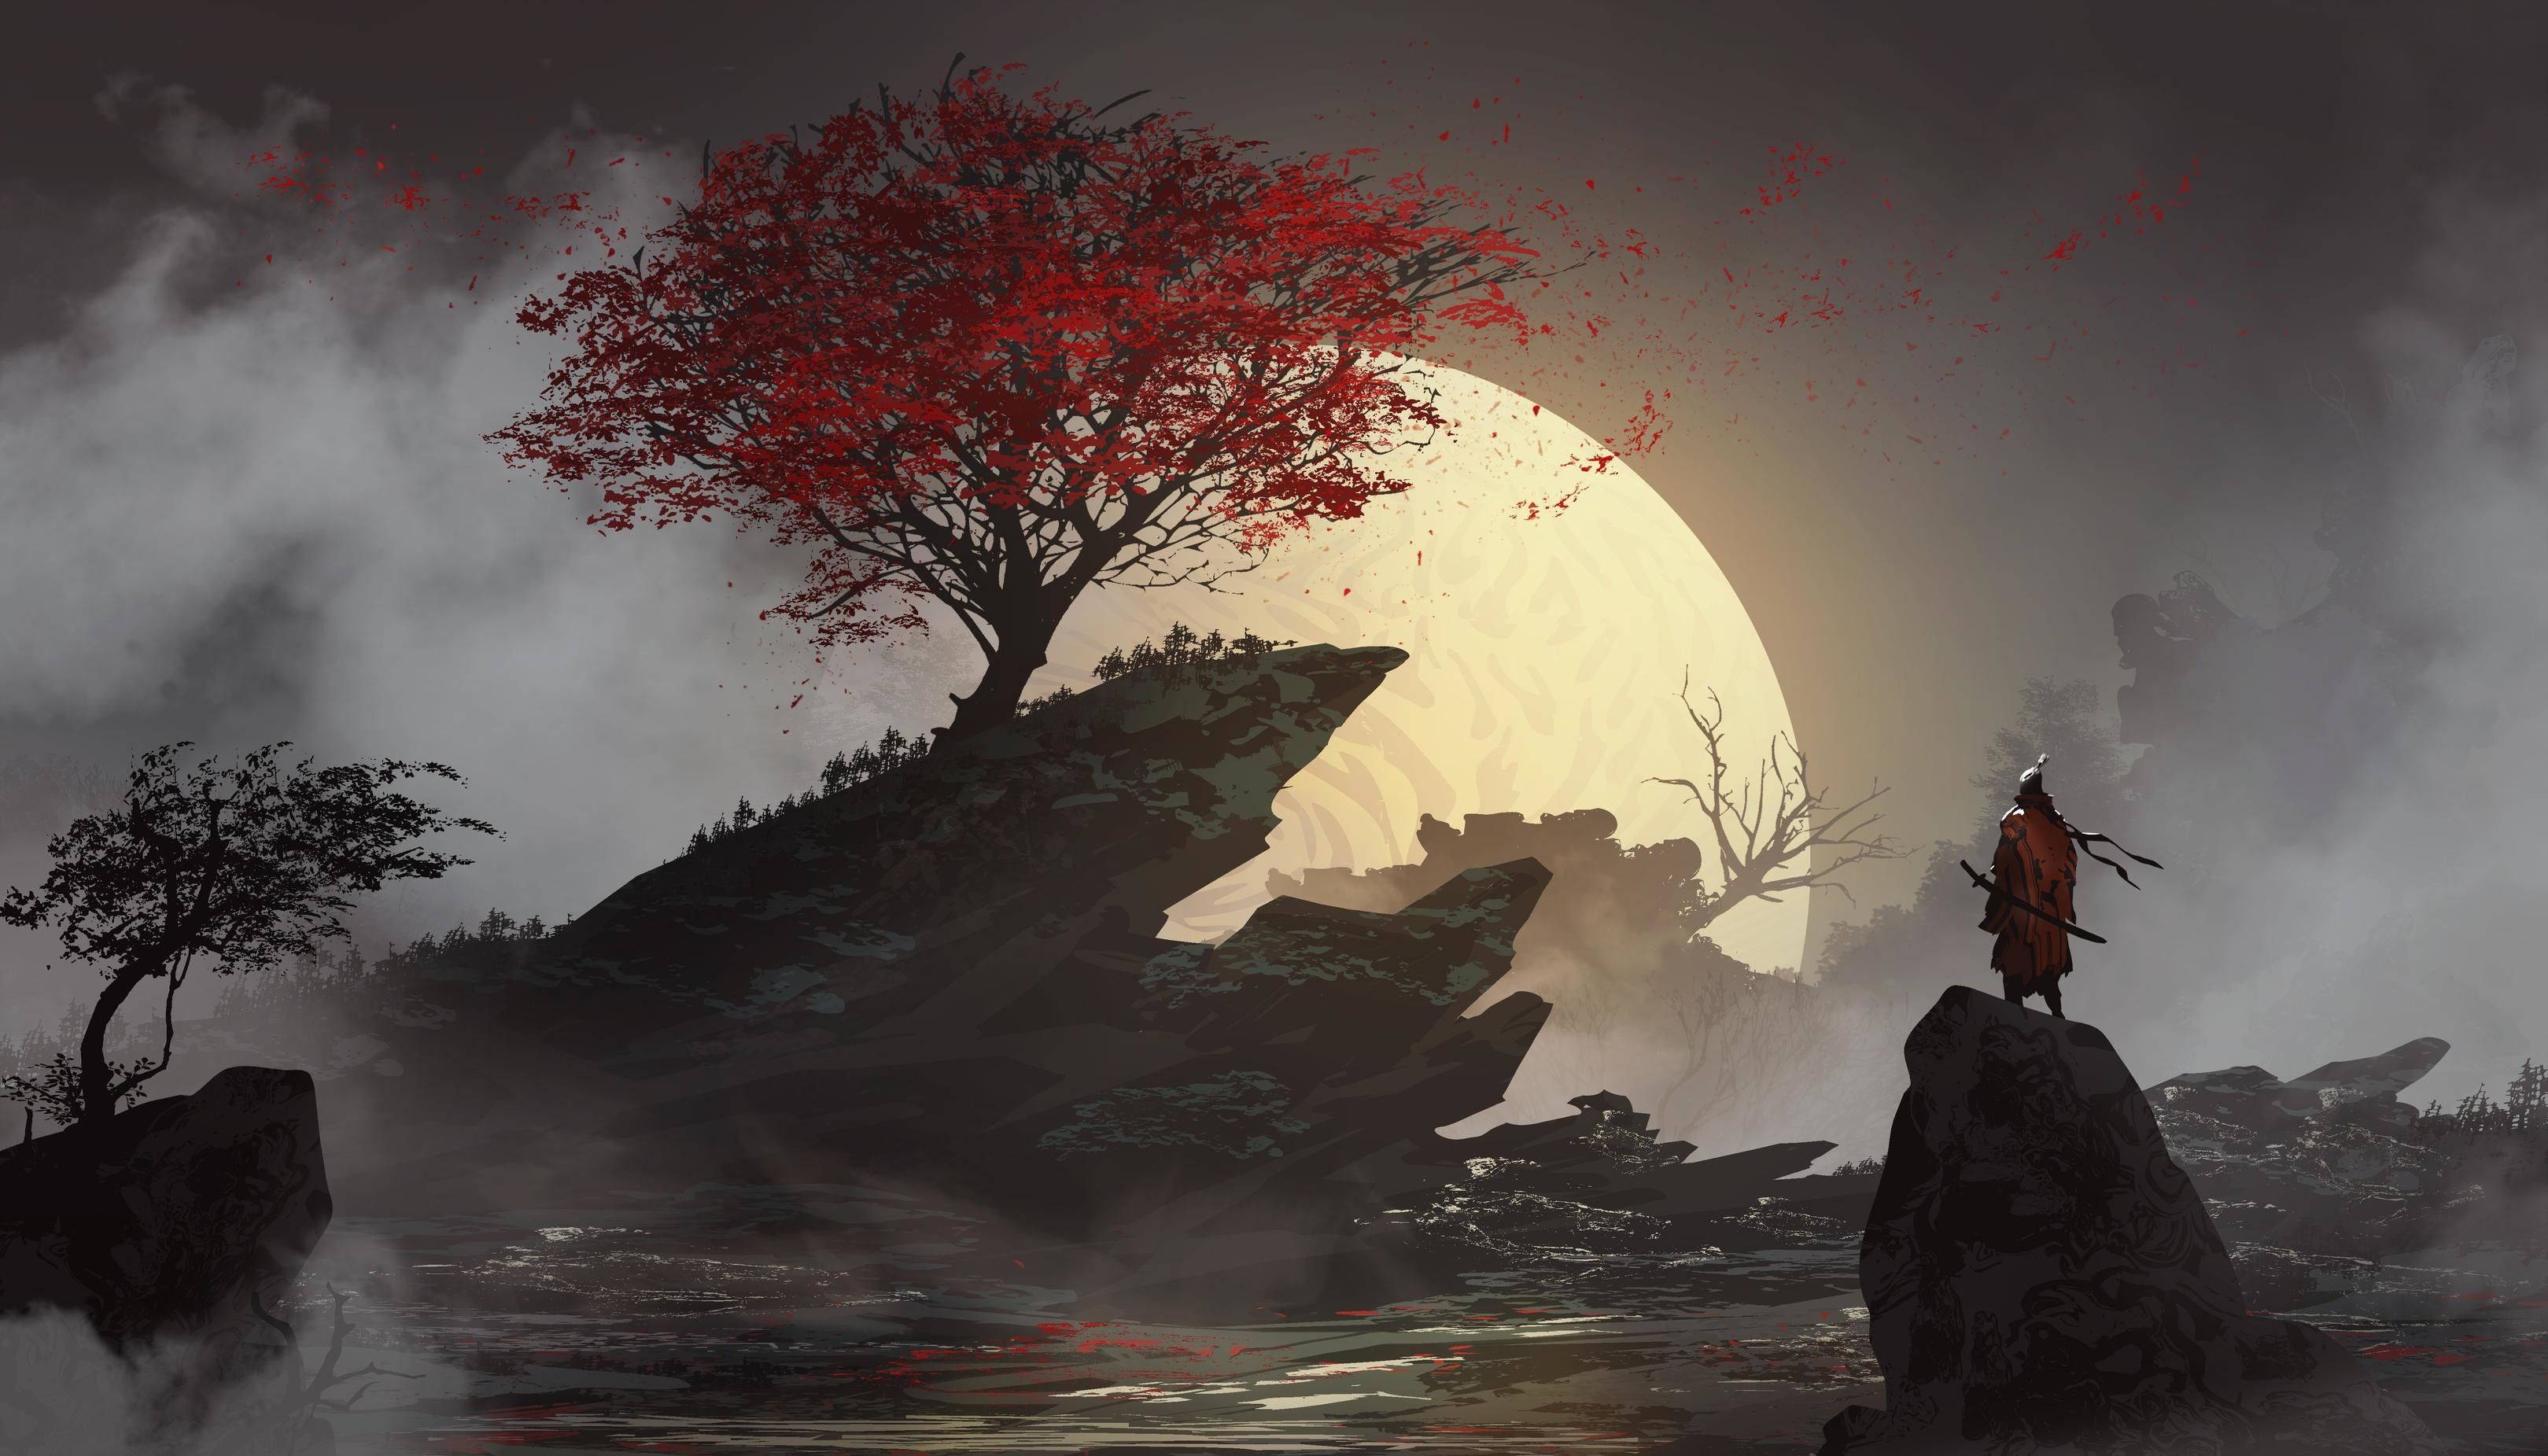 A man standing on rocks with red leaves - Samurai